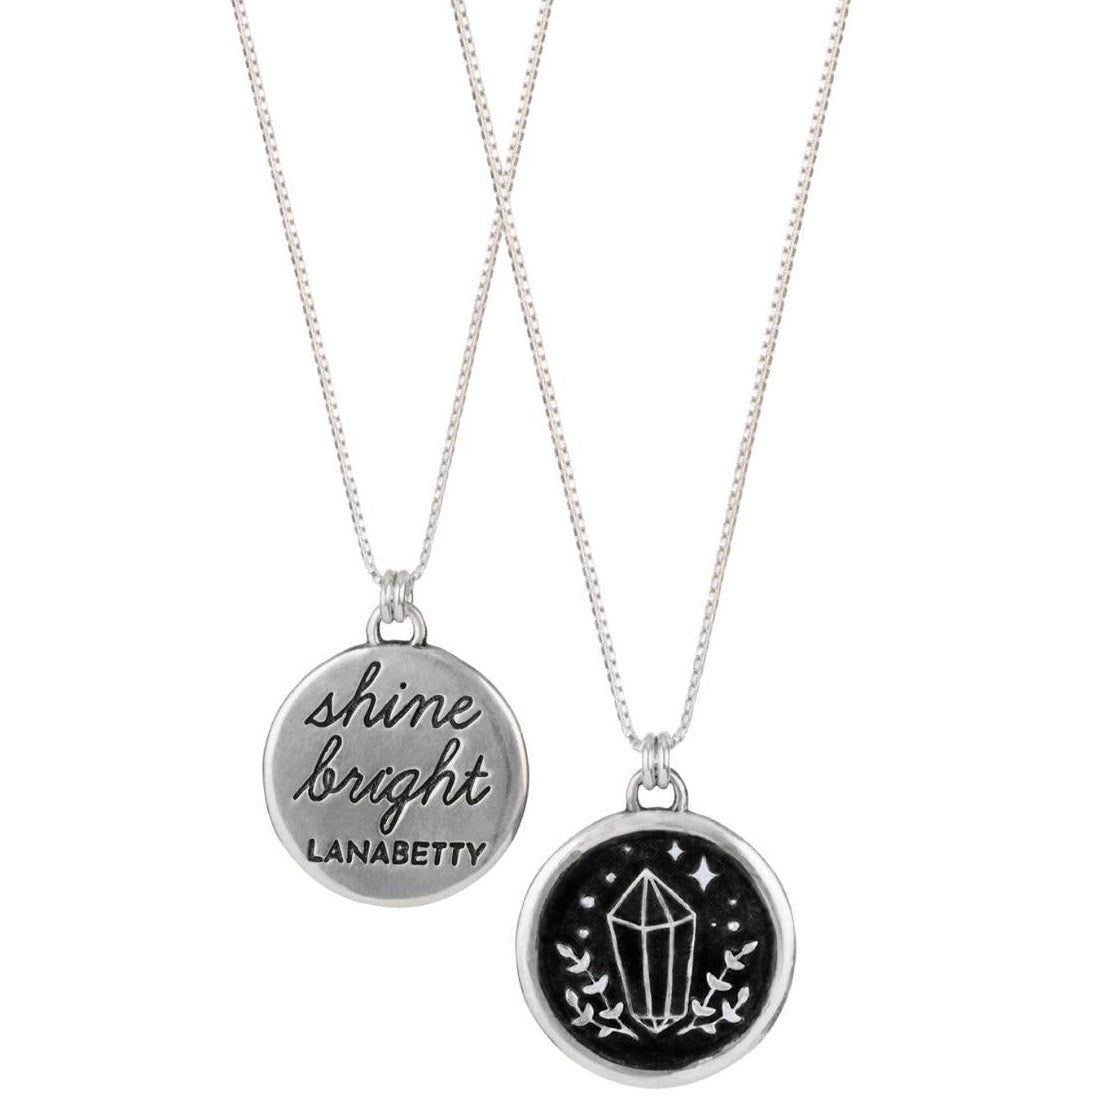 Shine Bright Sterling Silver Mantra Necklace with 18" chain by Lanabetty